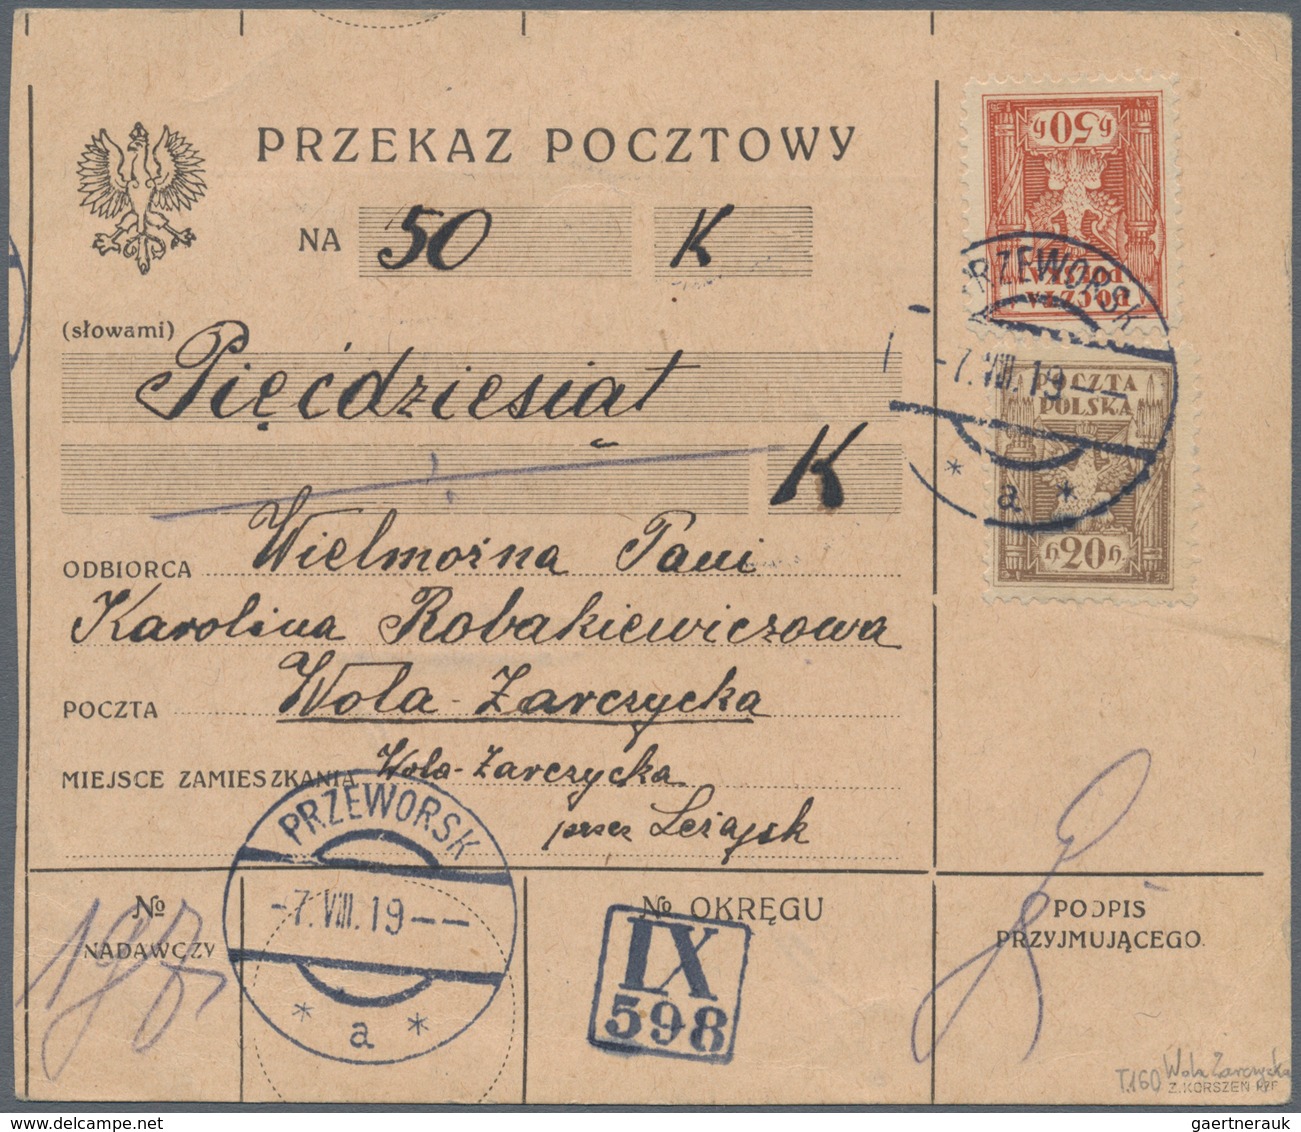 Polen - Lokalausgaben 1915/19: 1919/1923 (ca): 132 postal orders franked with postage due stamps fro